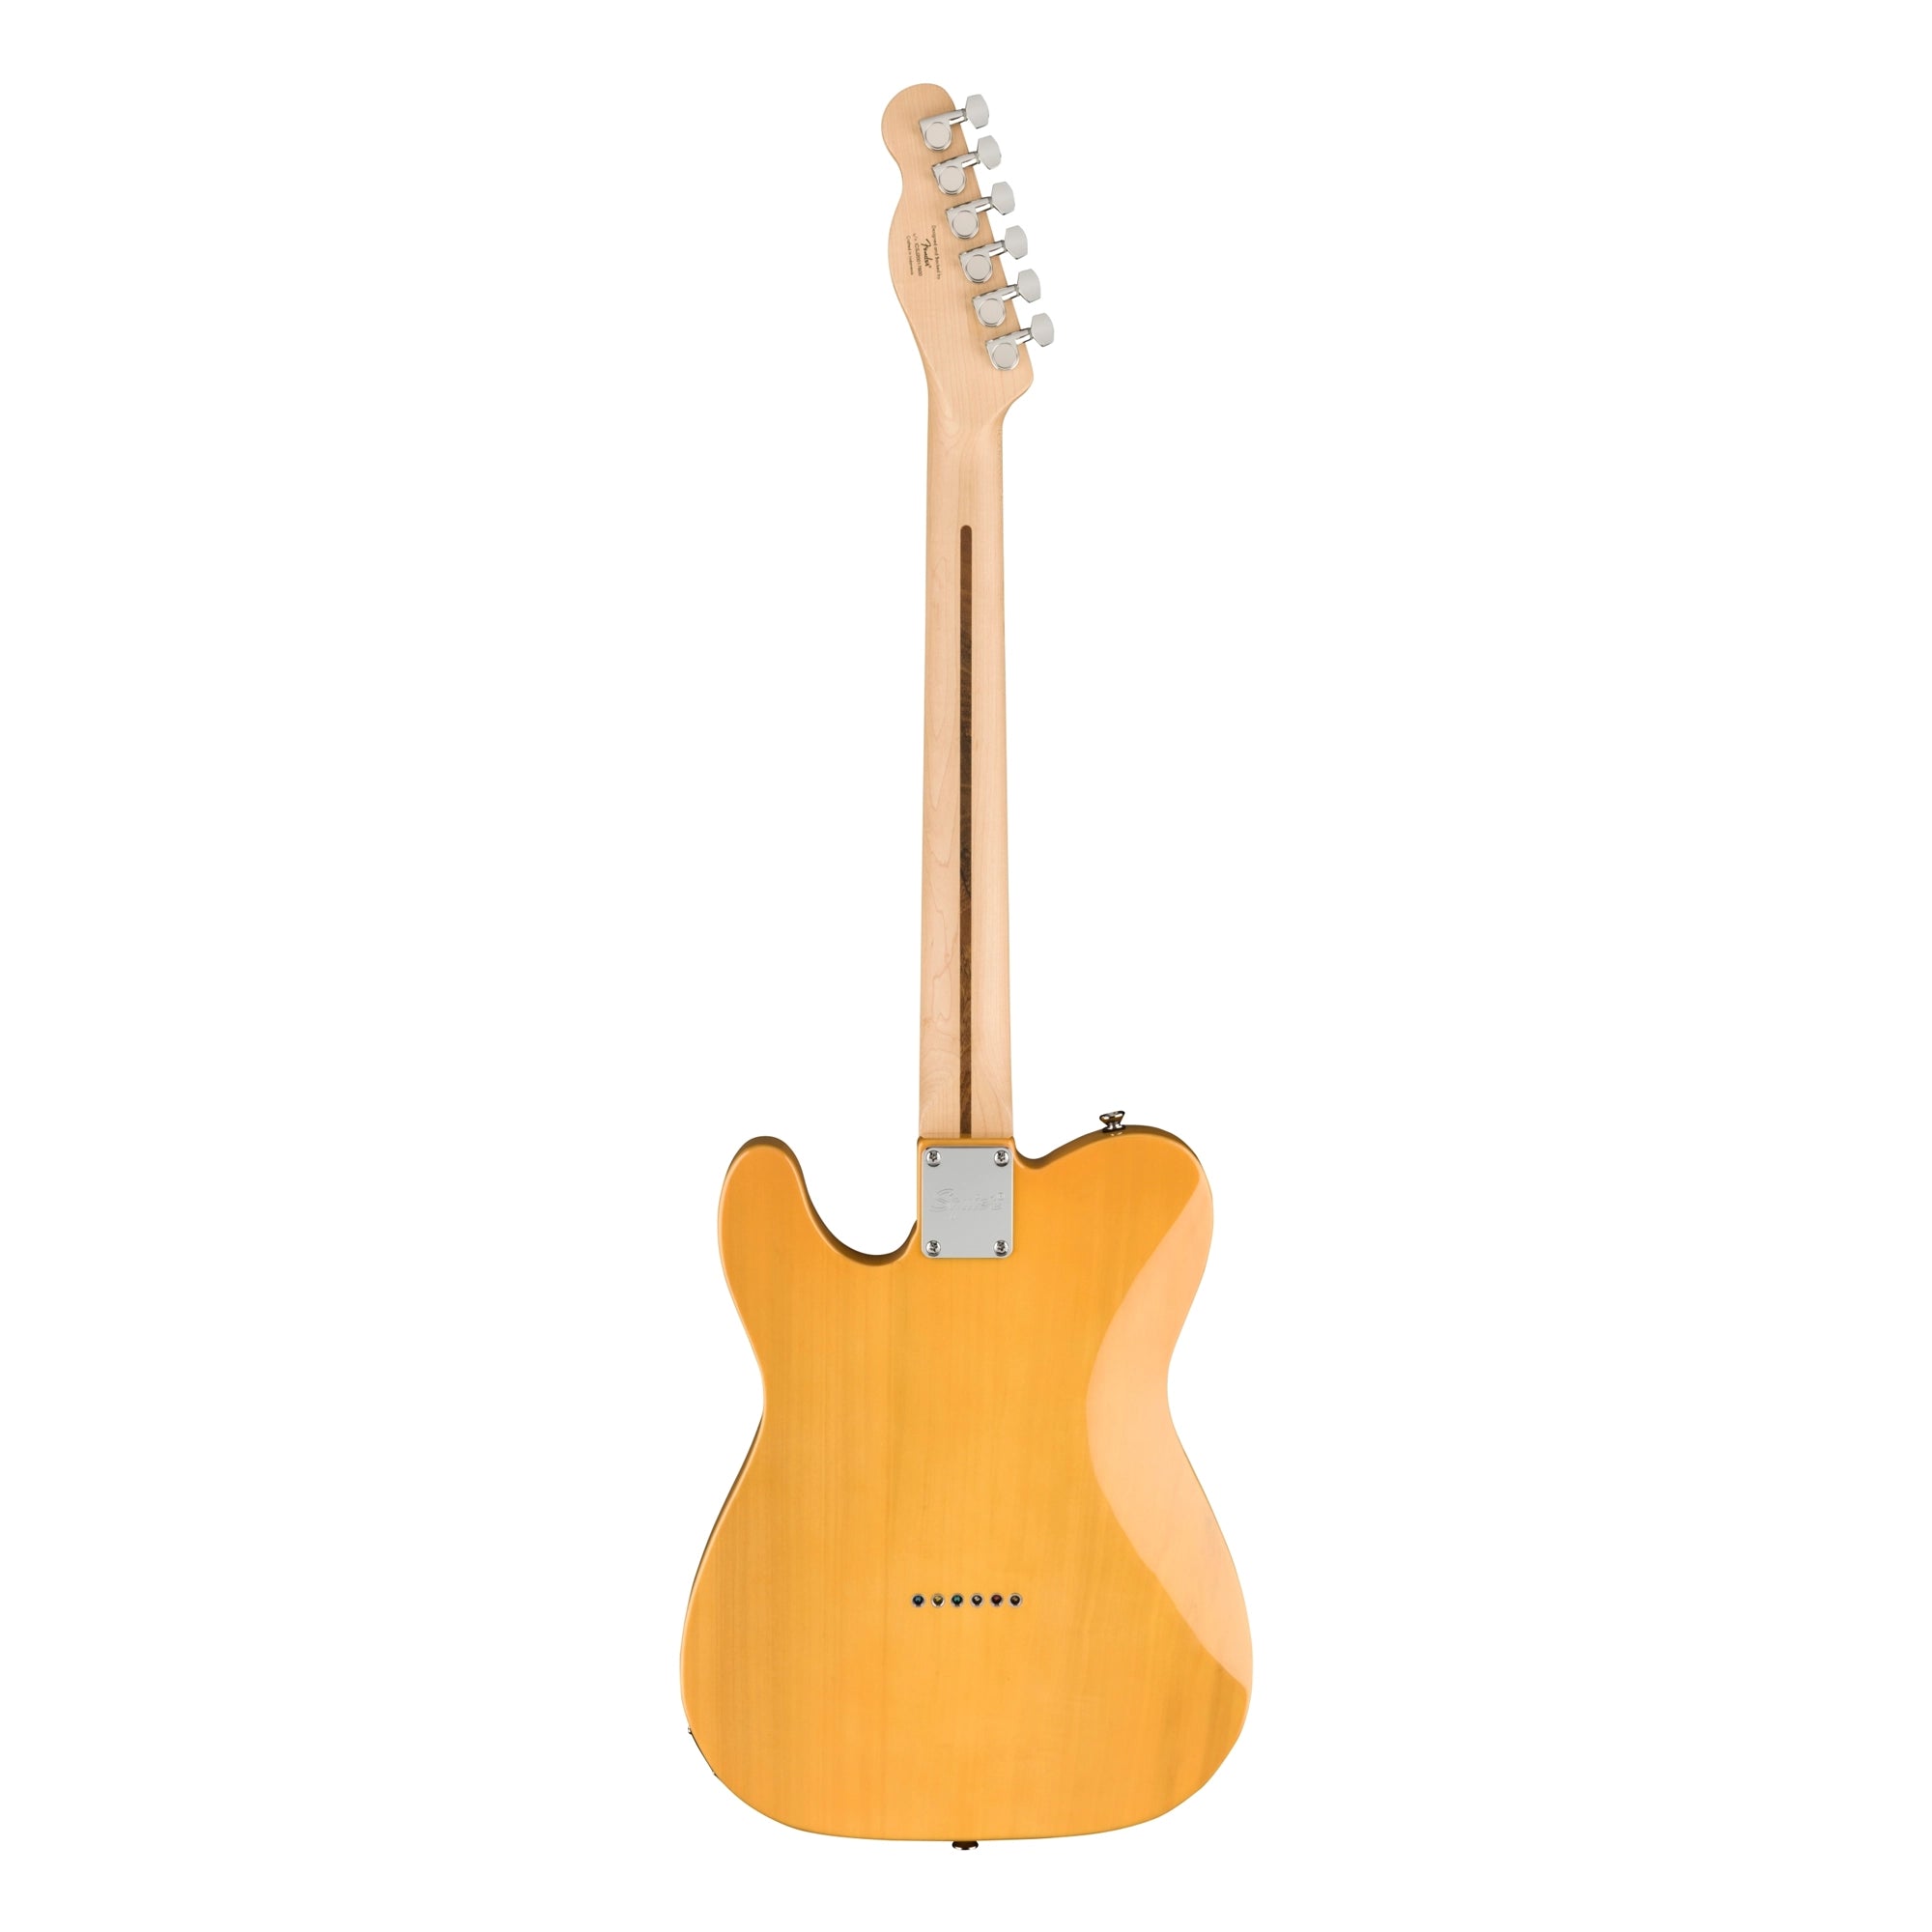 Squier Affinity Series Telecaster Electric Guitar - Butterscotch Blonde